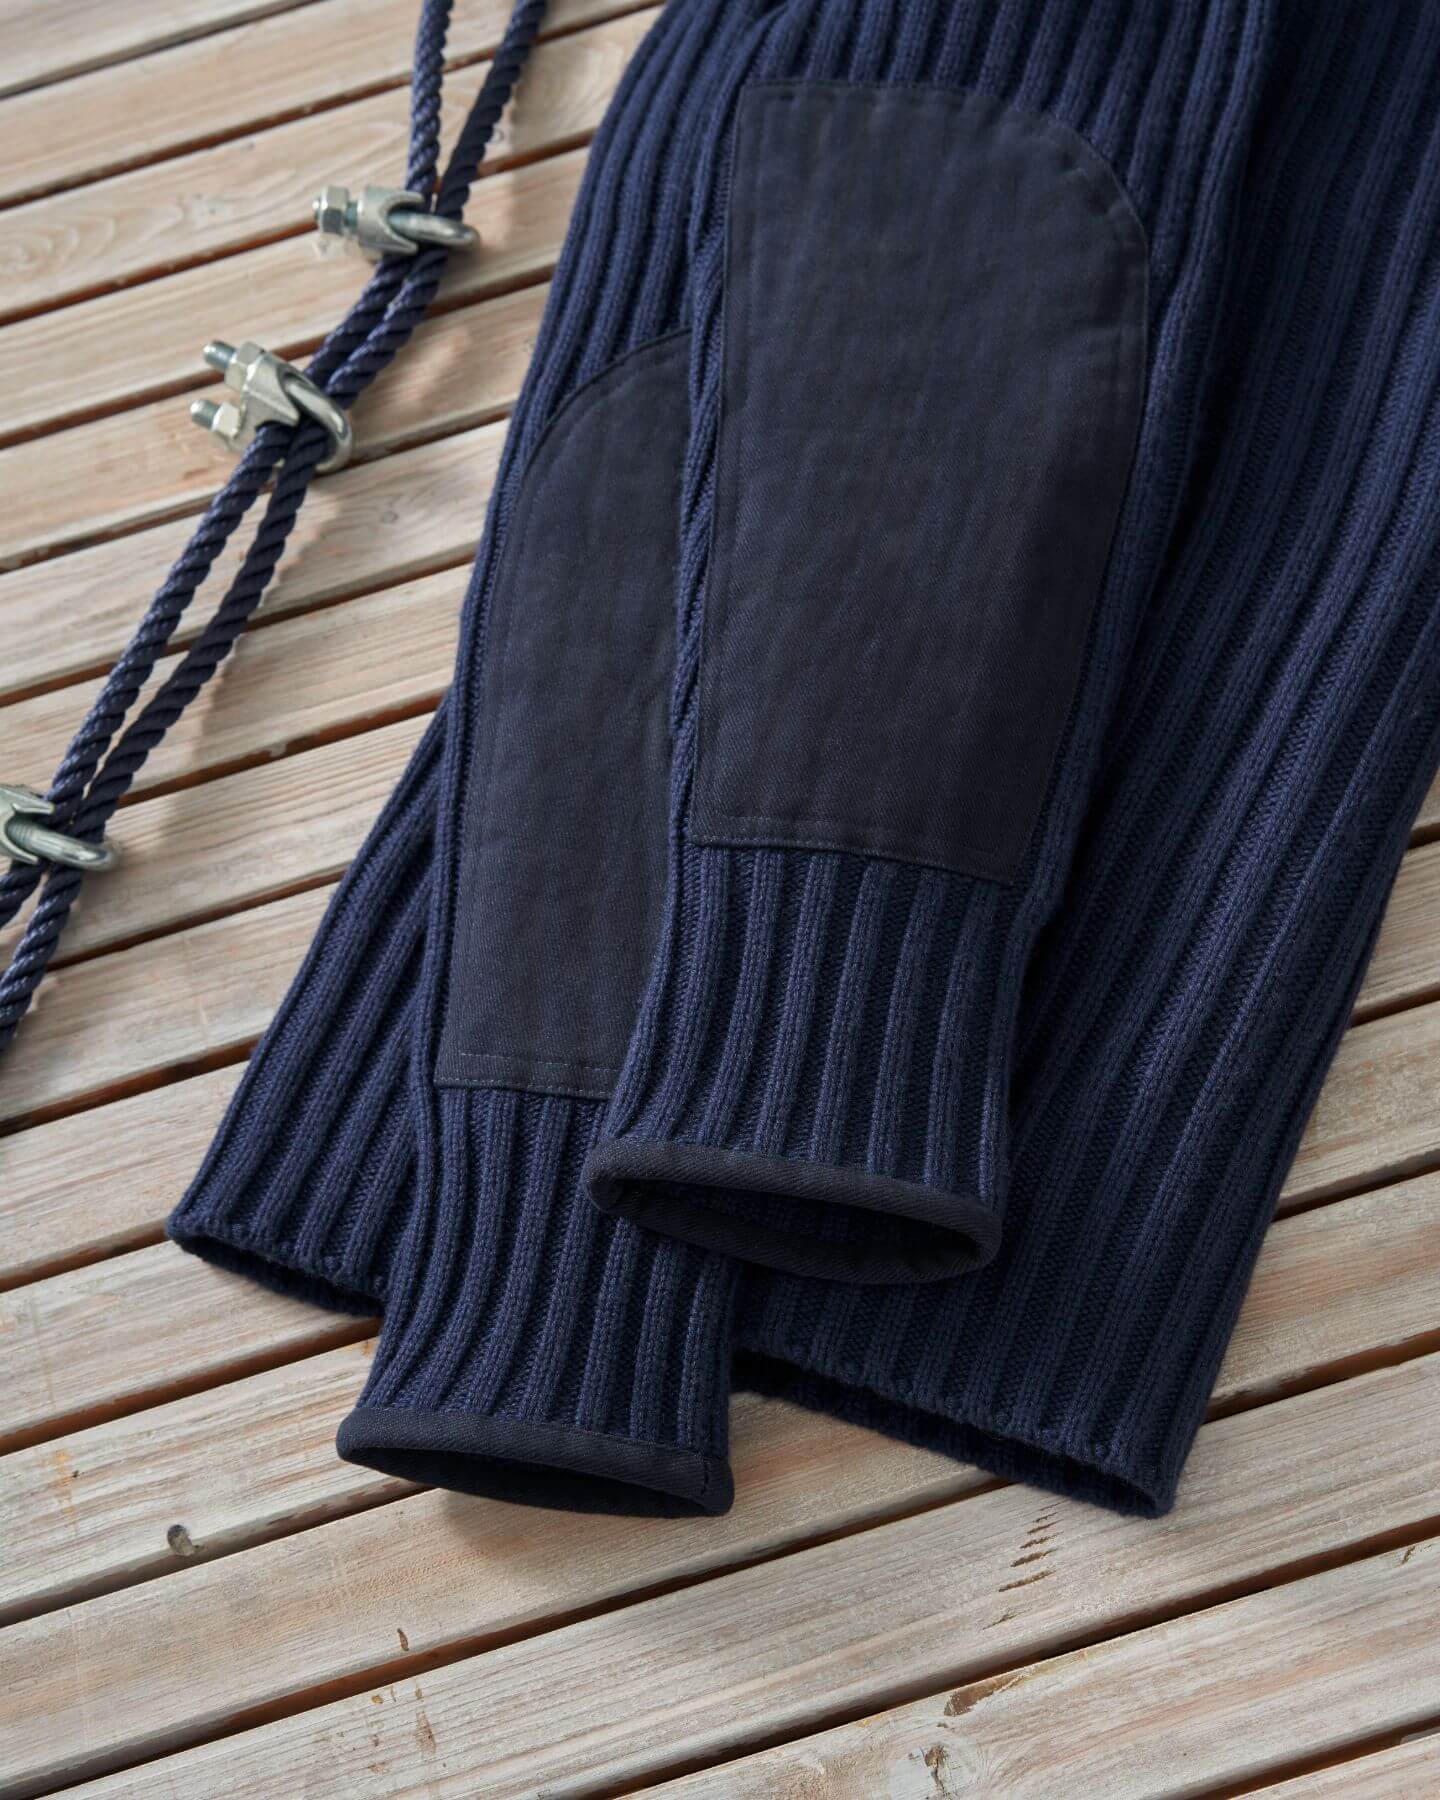 007 Ribbed Army Sweater Navy Blue | N.Peal